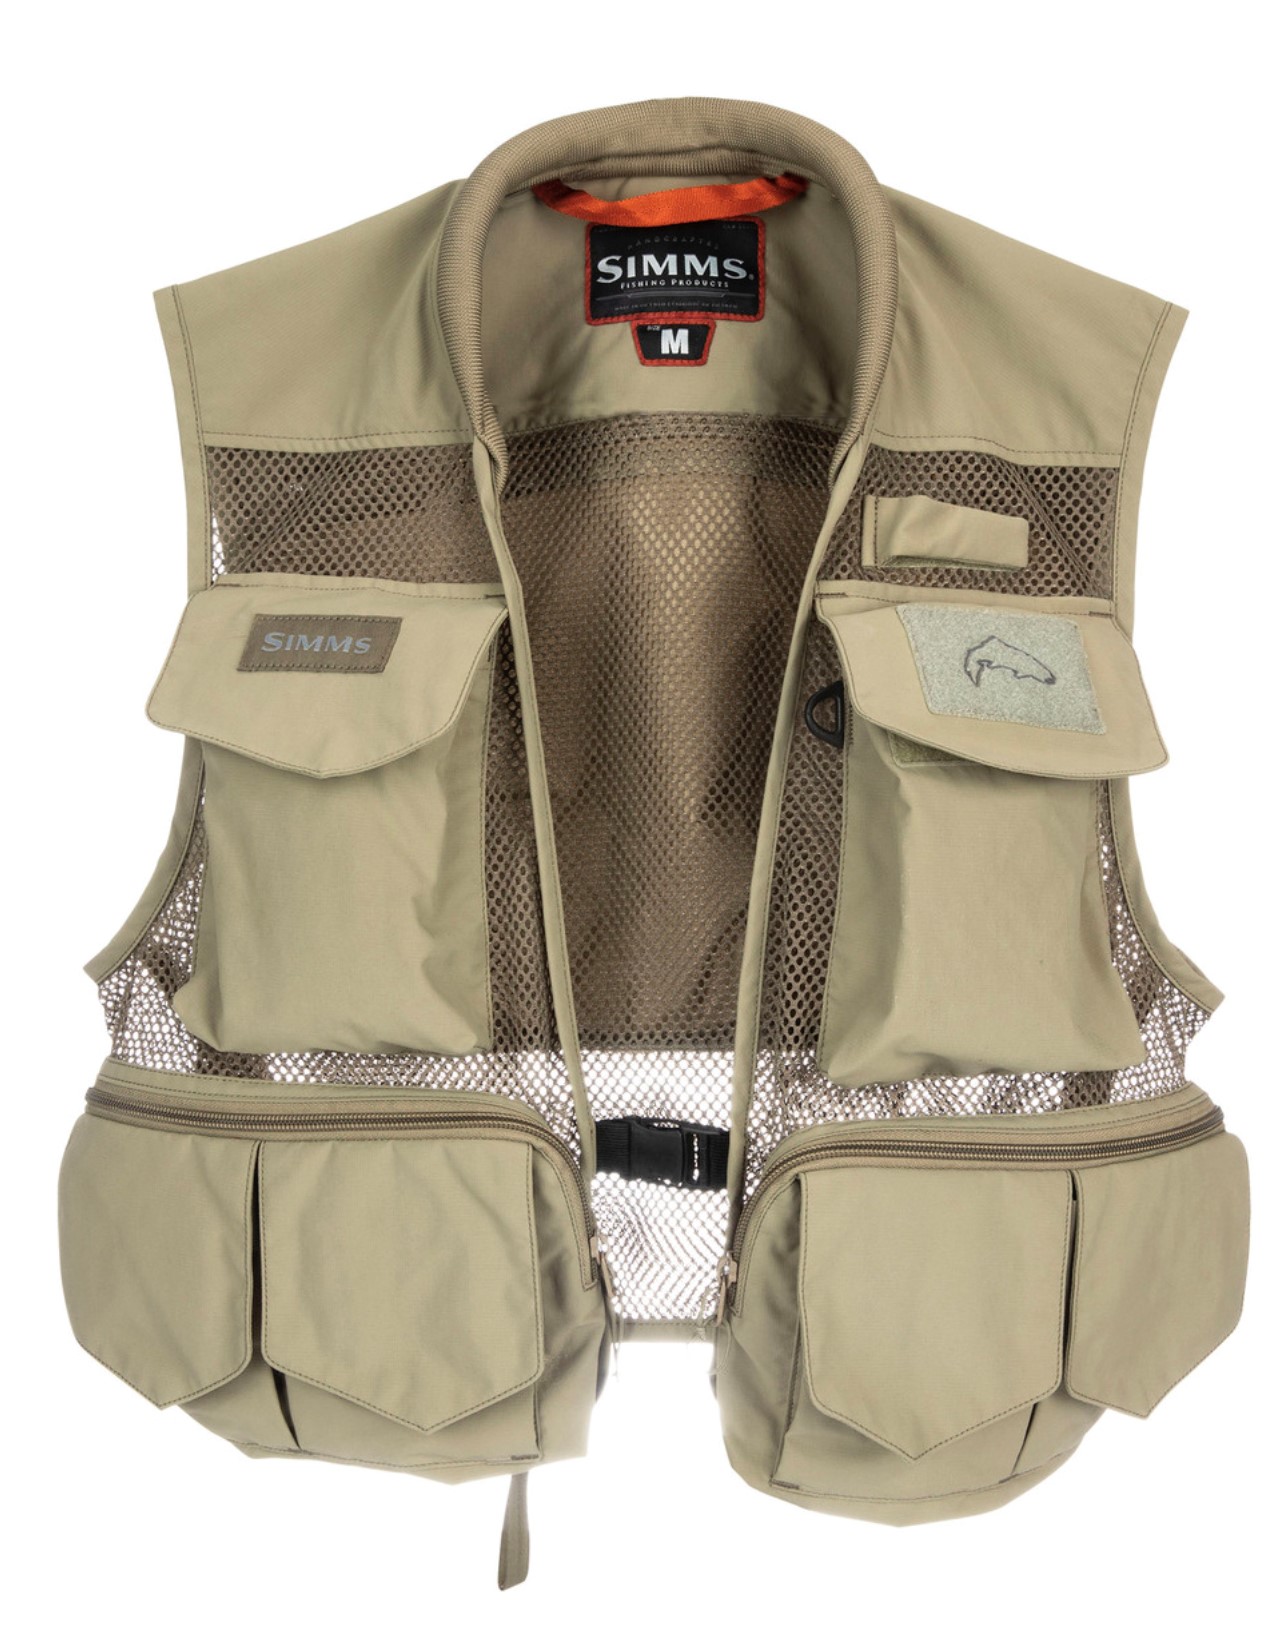 Simms Tributary Vest - Tan - Small